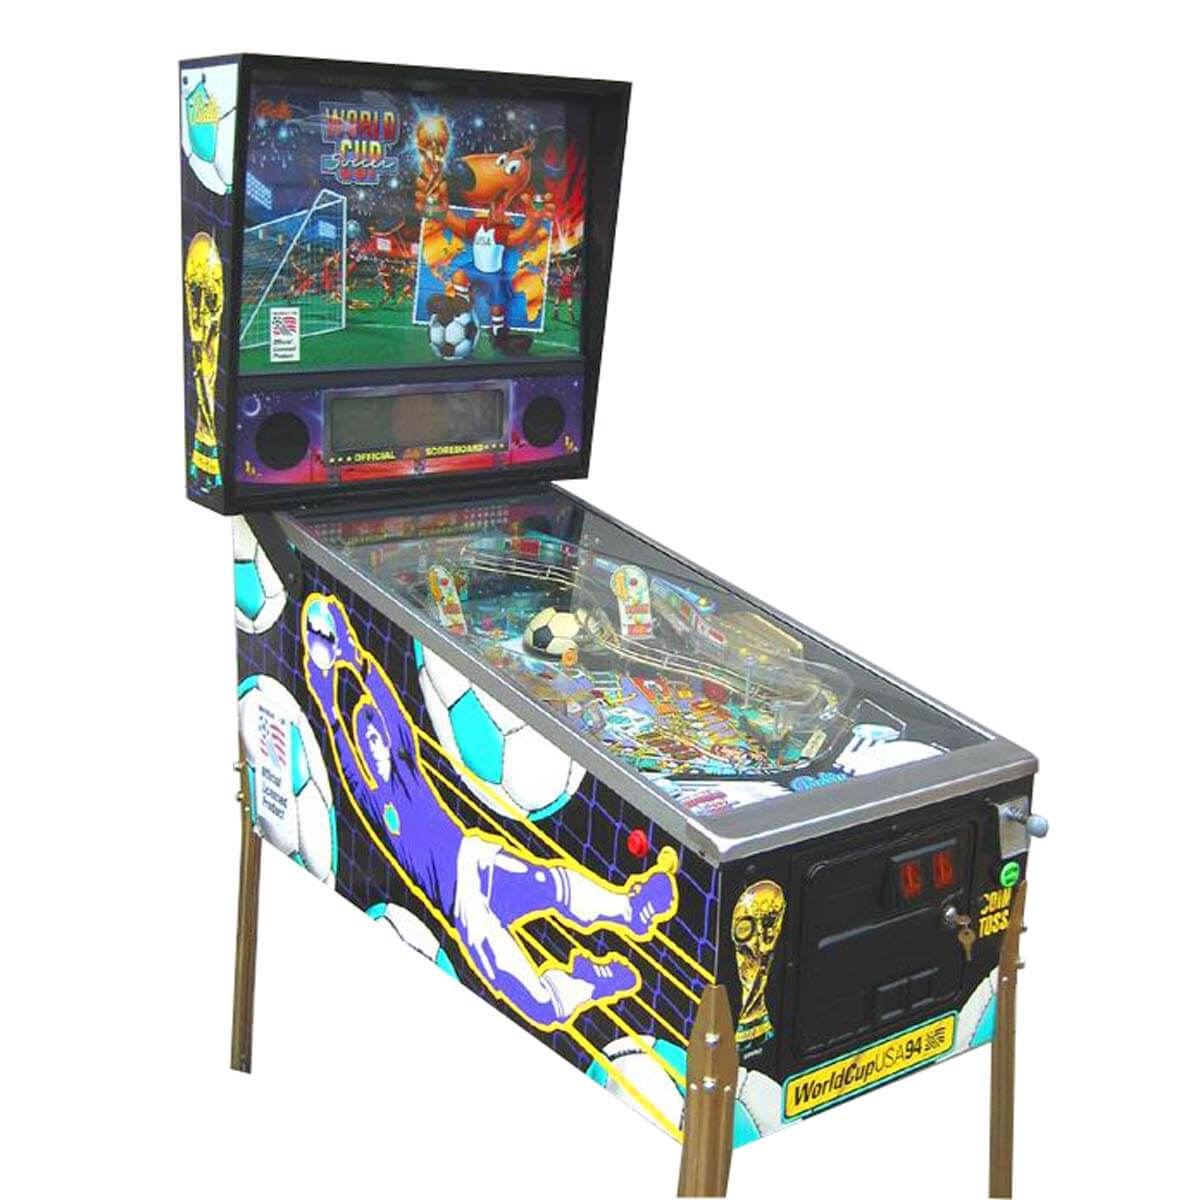 Details about   MIDWAY WORLD CUP SOCCER 94 PINBALL MACHINE PLAYFIELD PLASTIC 31-1925-32-SP 